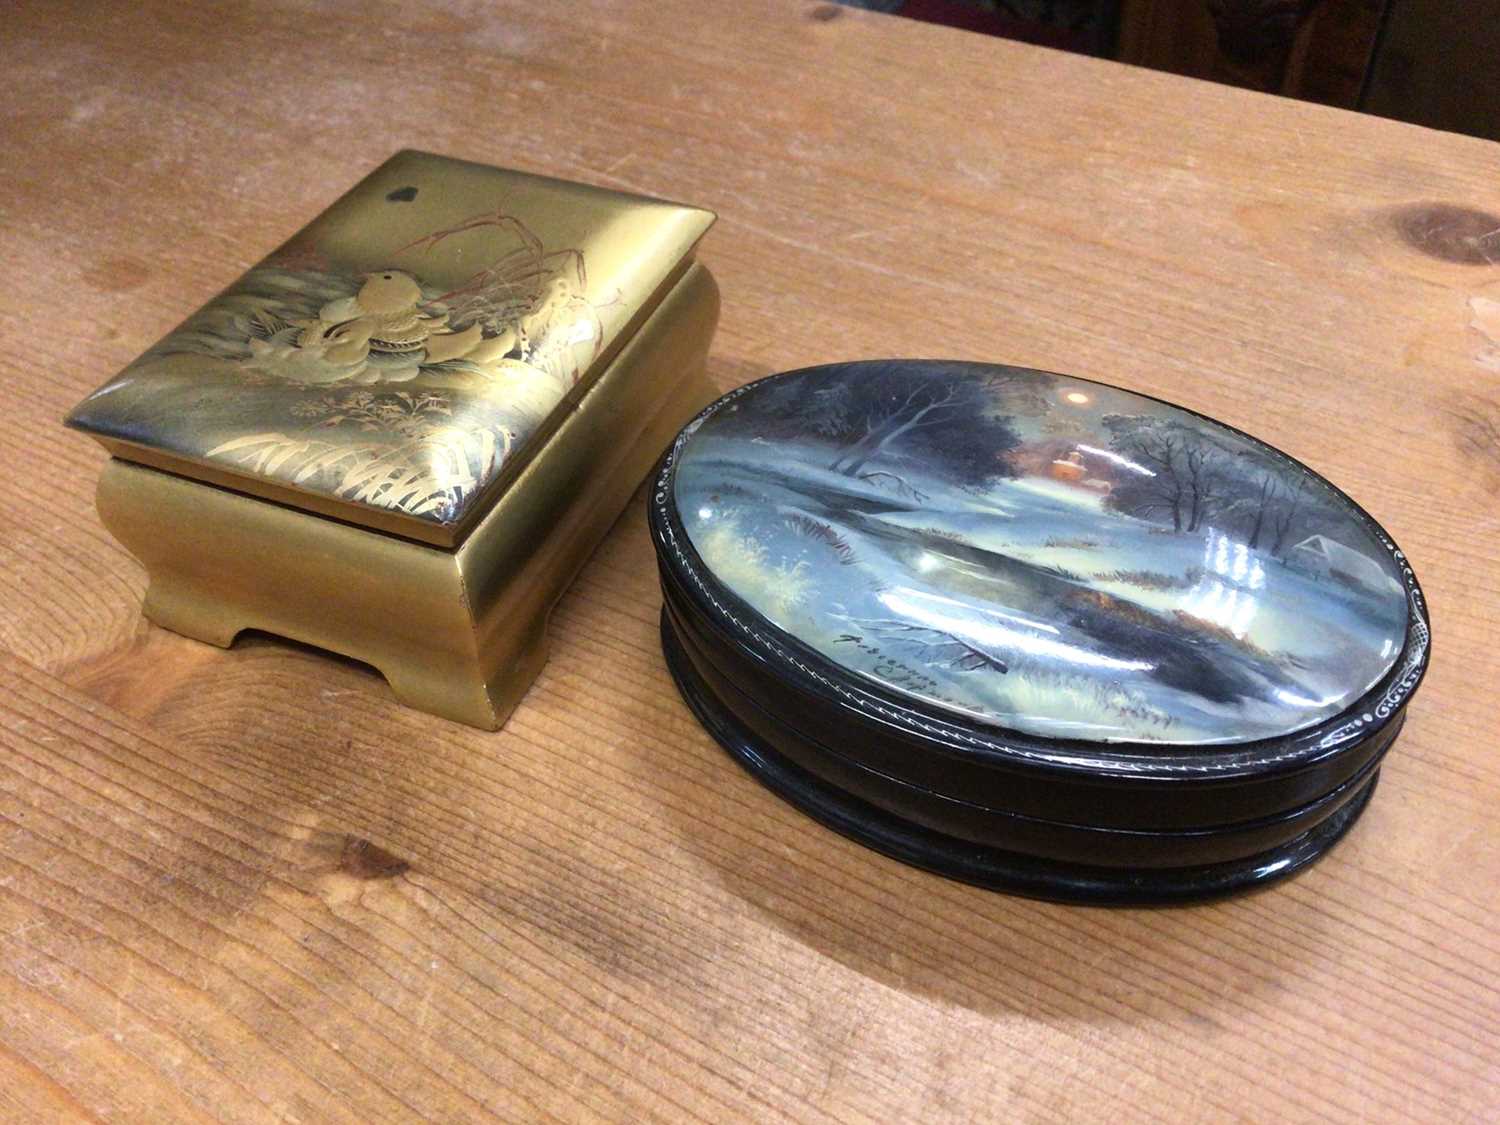 Lot 48 - Japanese lacquer box, together with a Russian lacquer box